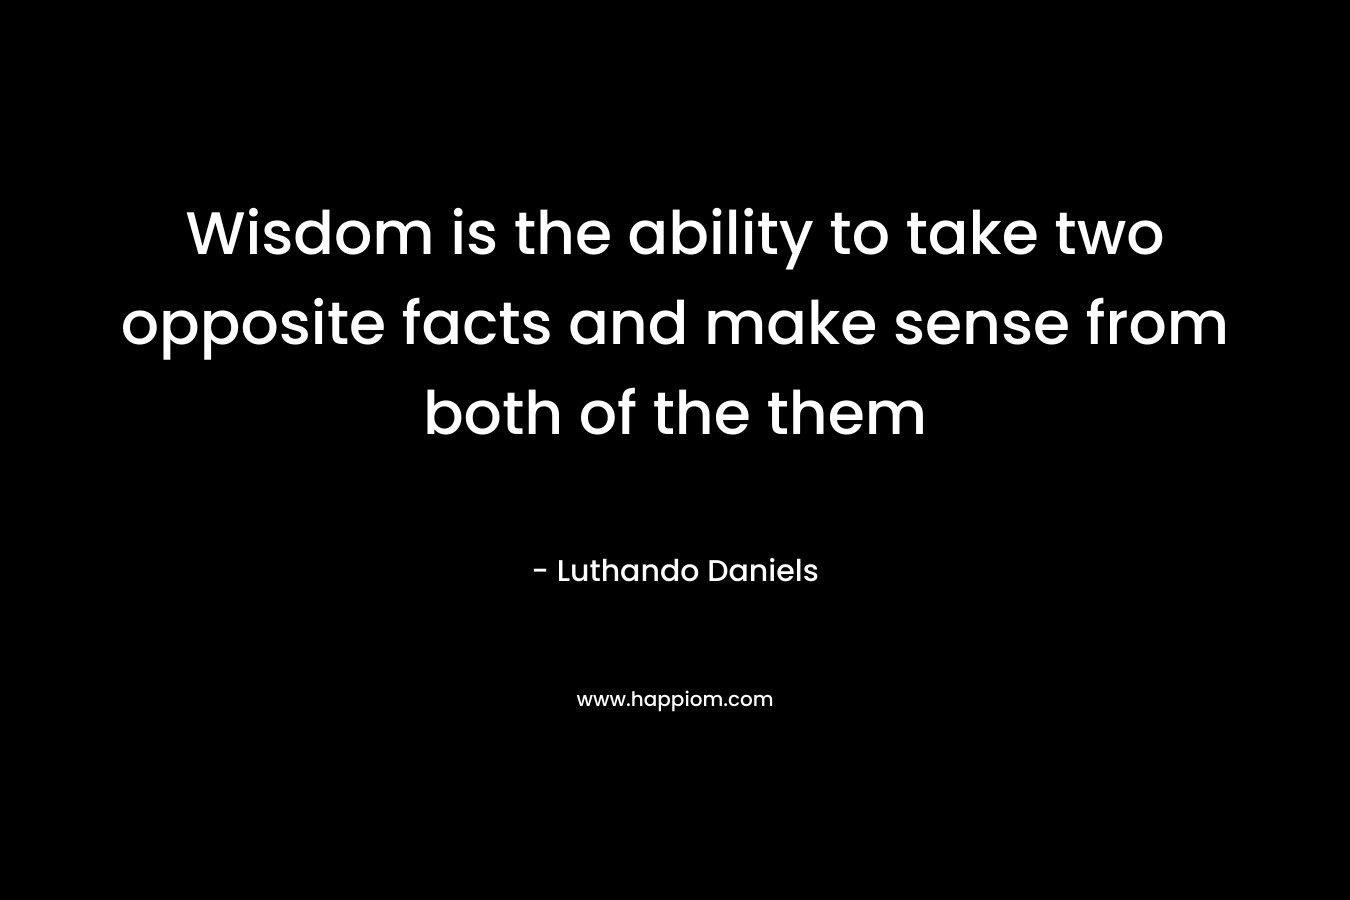 Wisdom is the ability to take two opposite facts and make sense from both of the them – Luthando Daniels